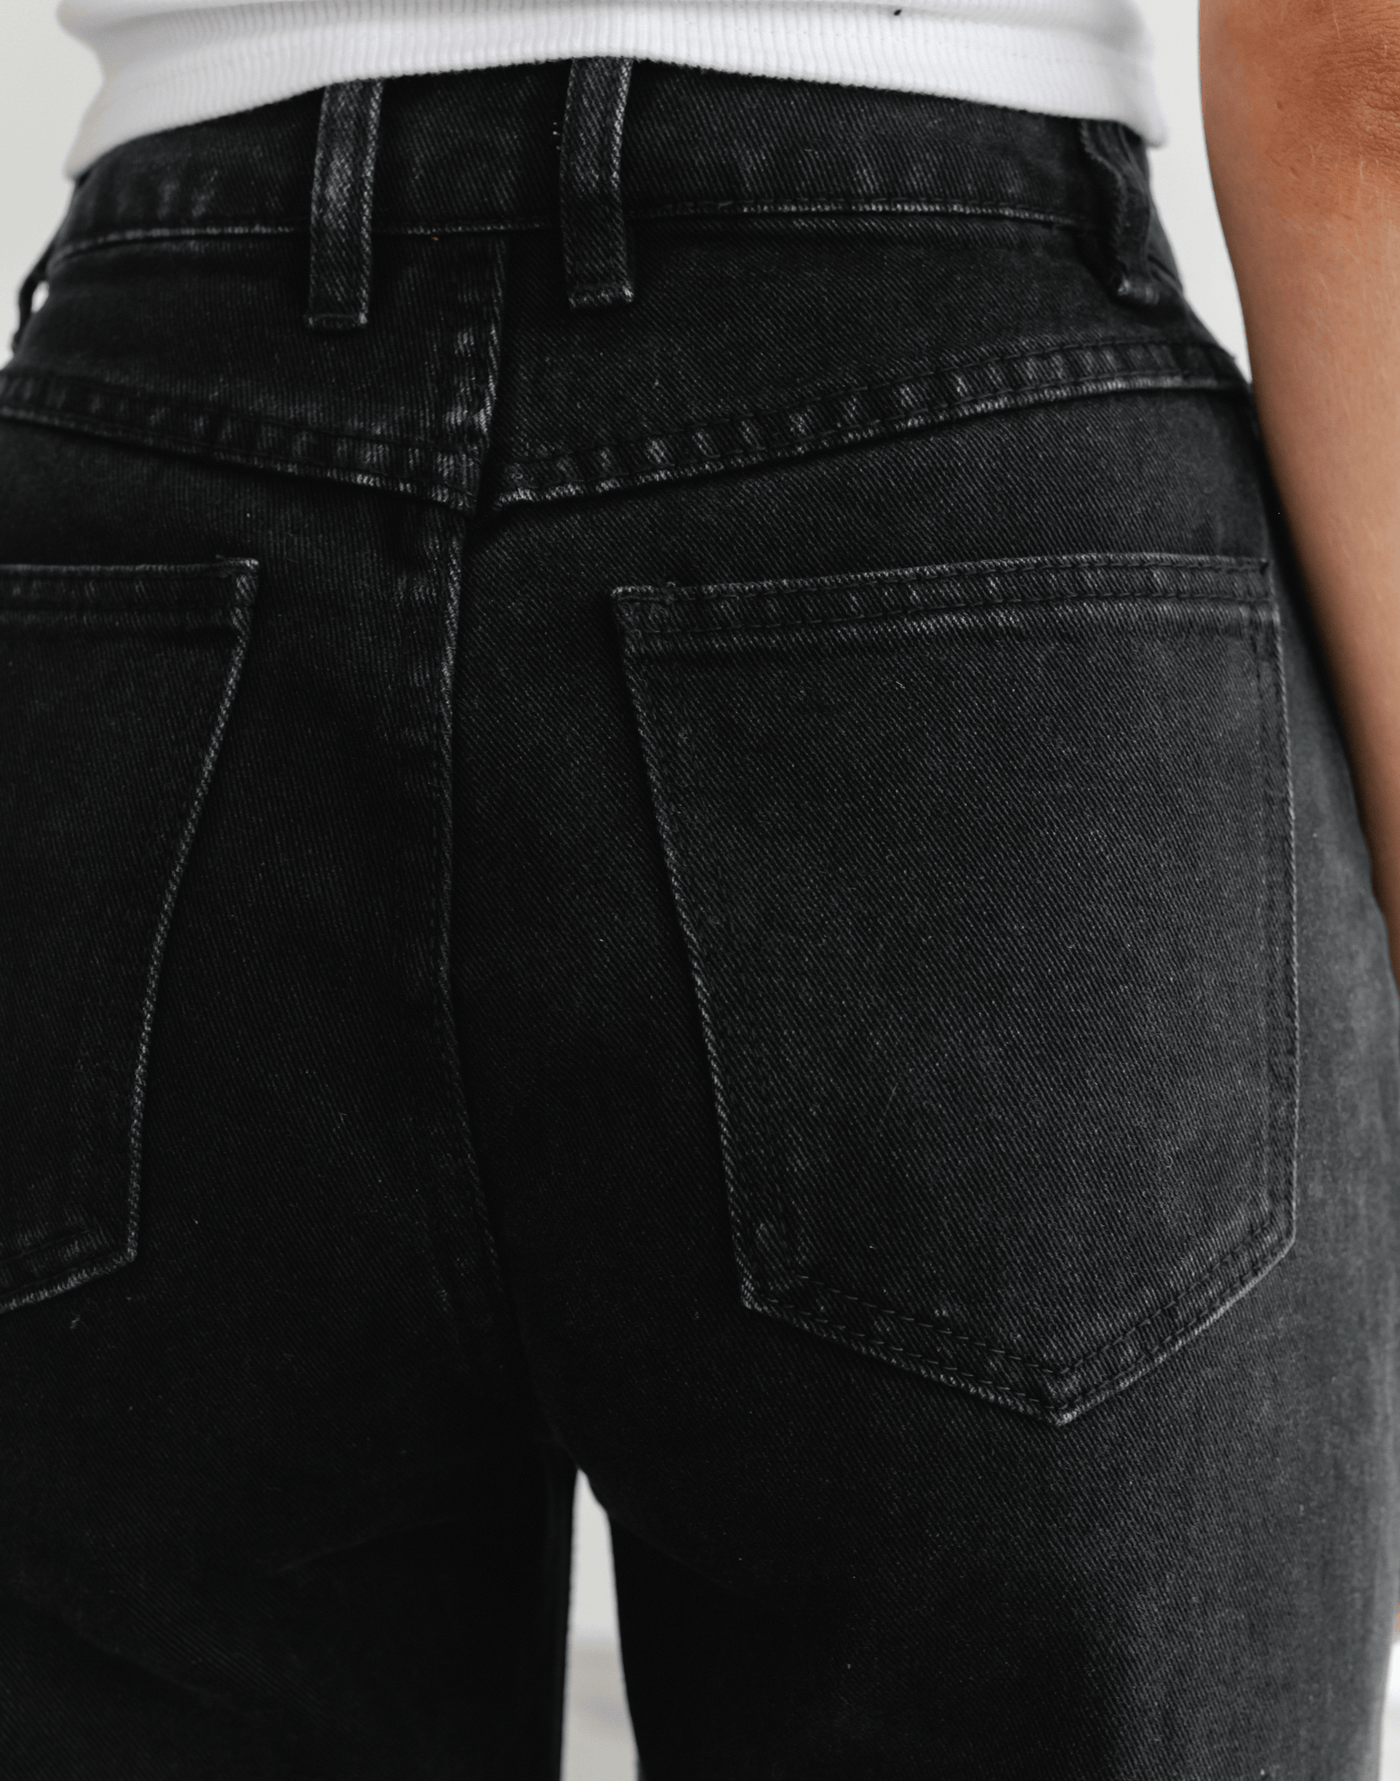 Cooper Straight Leg Jeans (Black) - High Waisted Jeans - Women's Pants - Charcoal Clothing